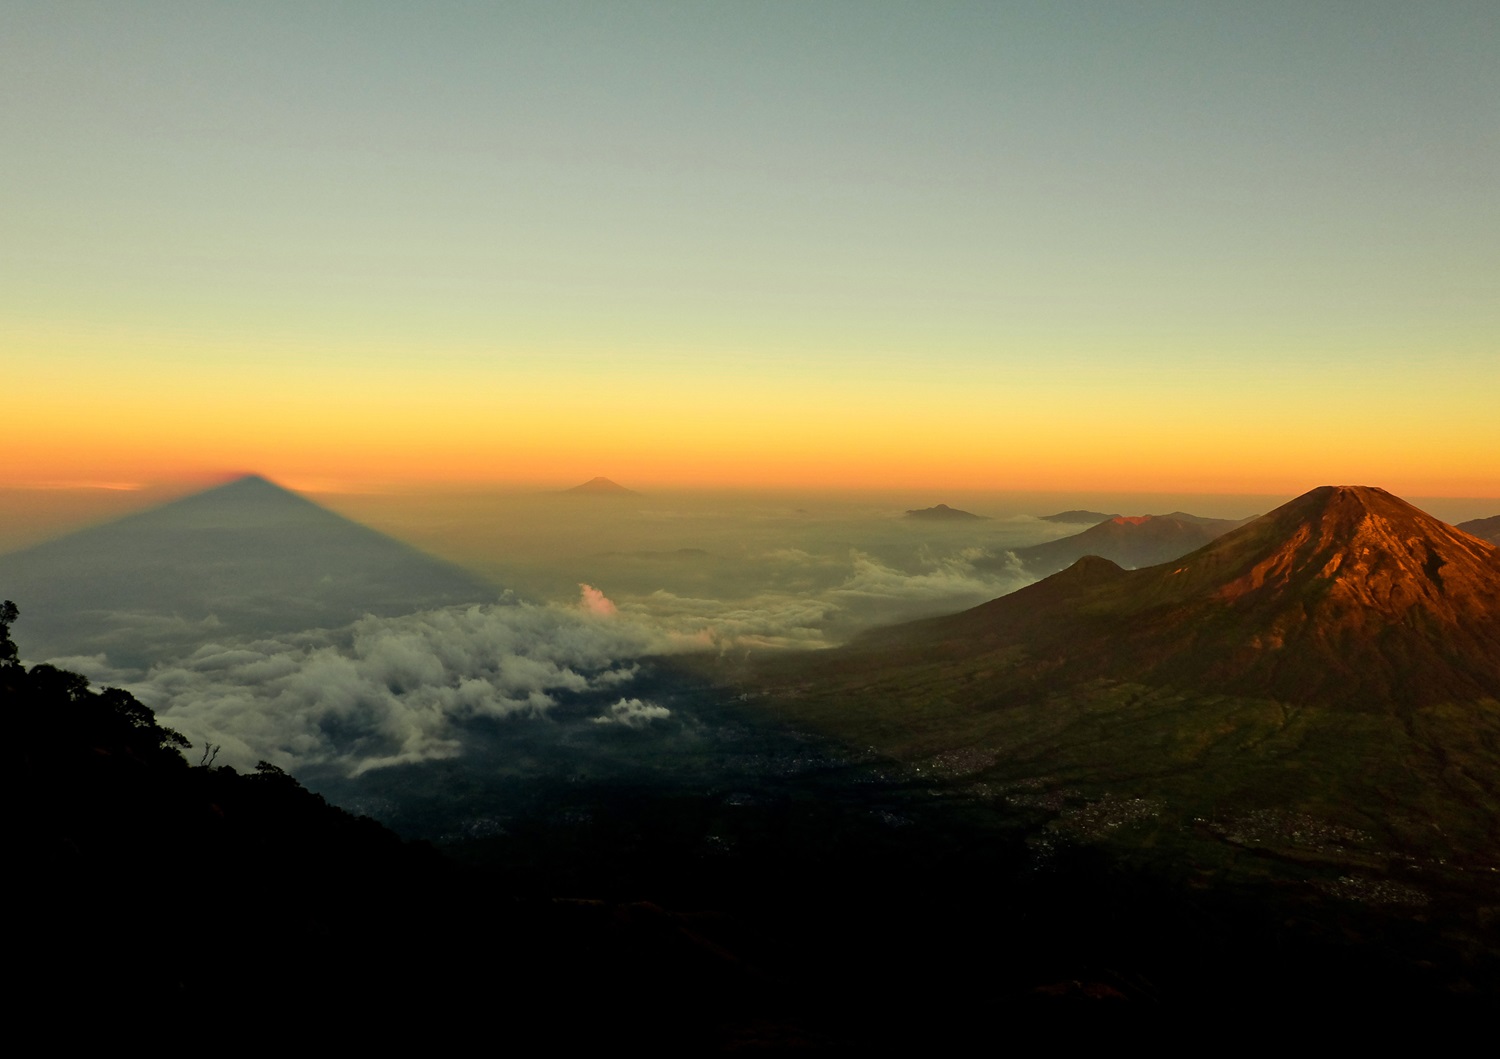 Volcanoes with sunset sky